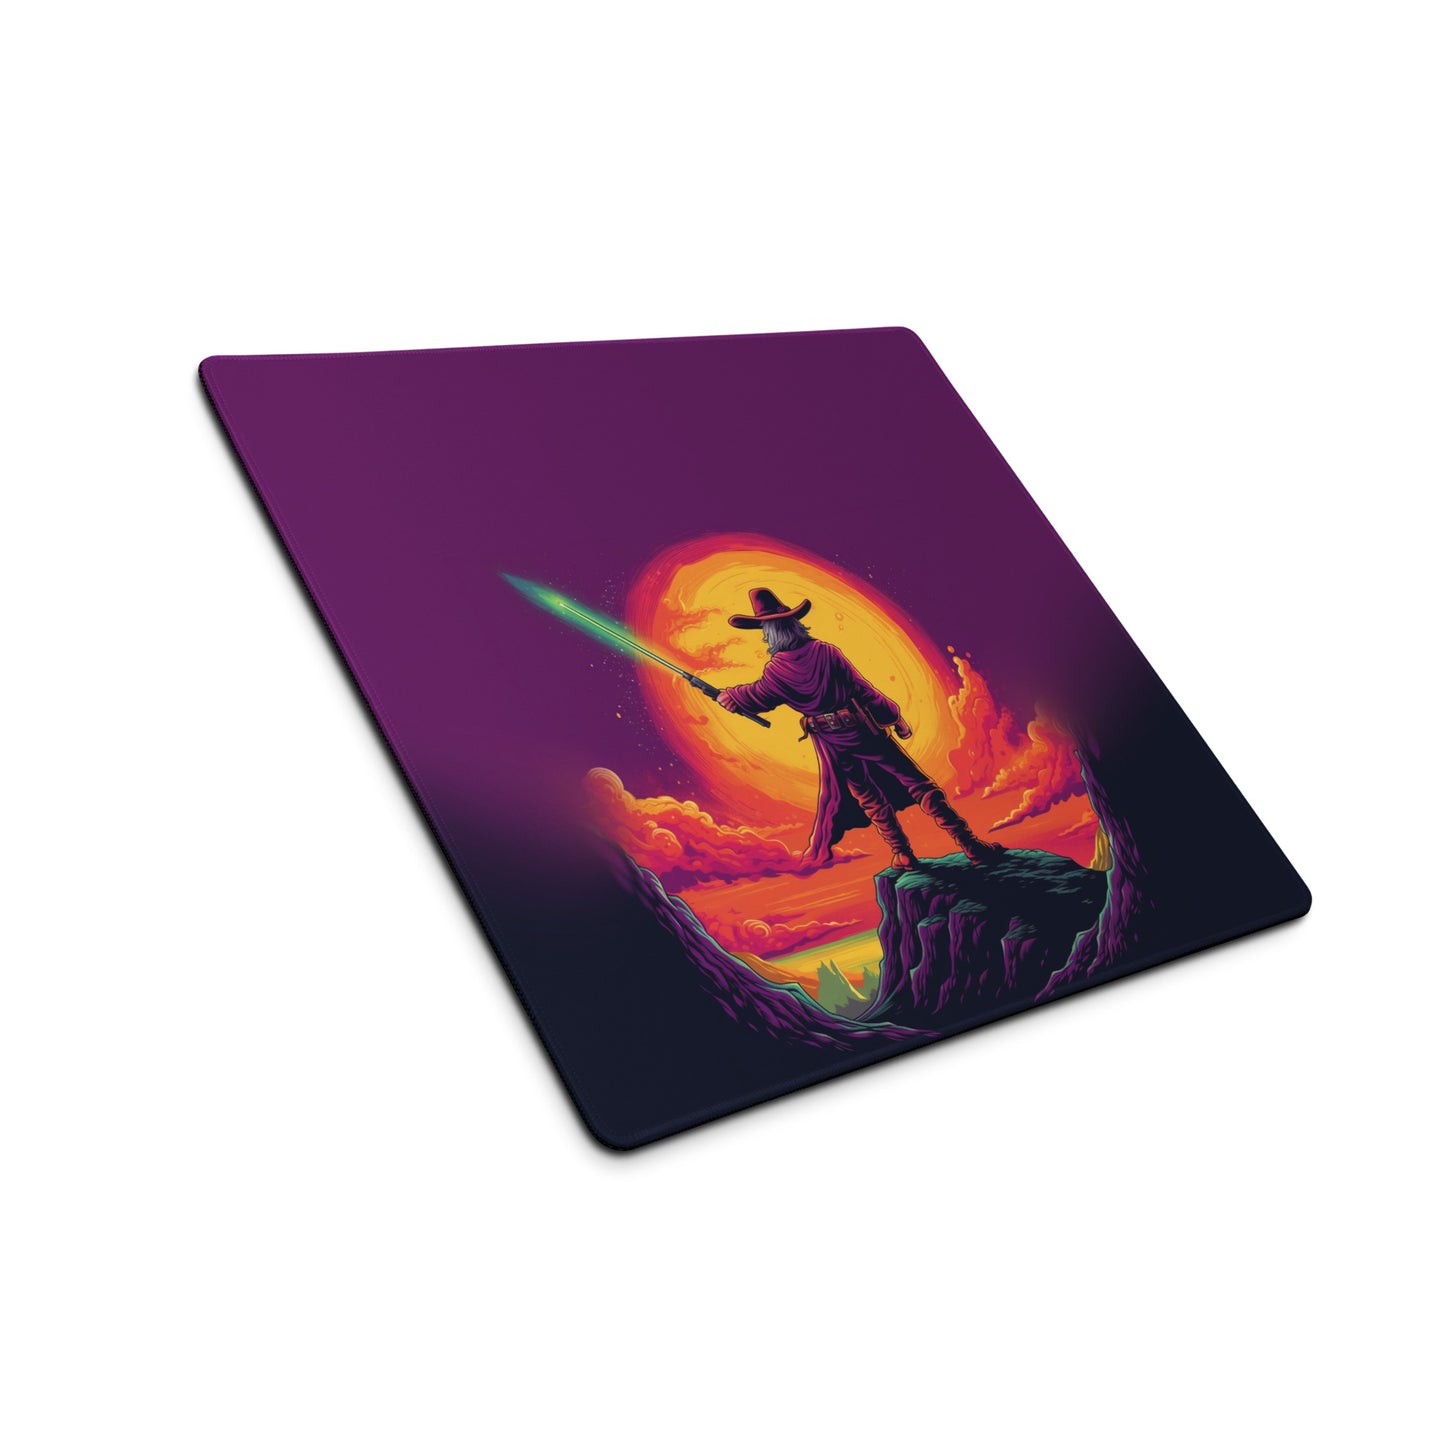 A 18" x 16" desk pad with a cowboy holding a glowing sword looking at the sunset sitting at an angle.